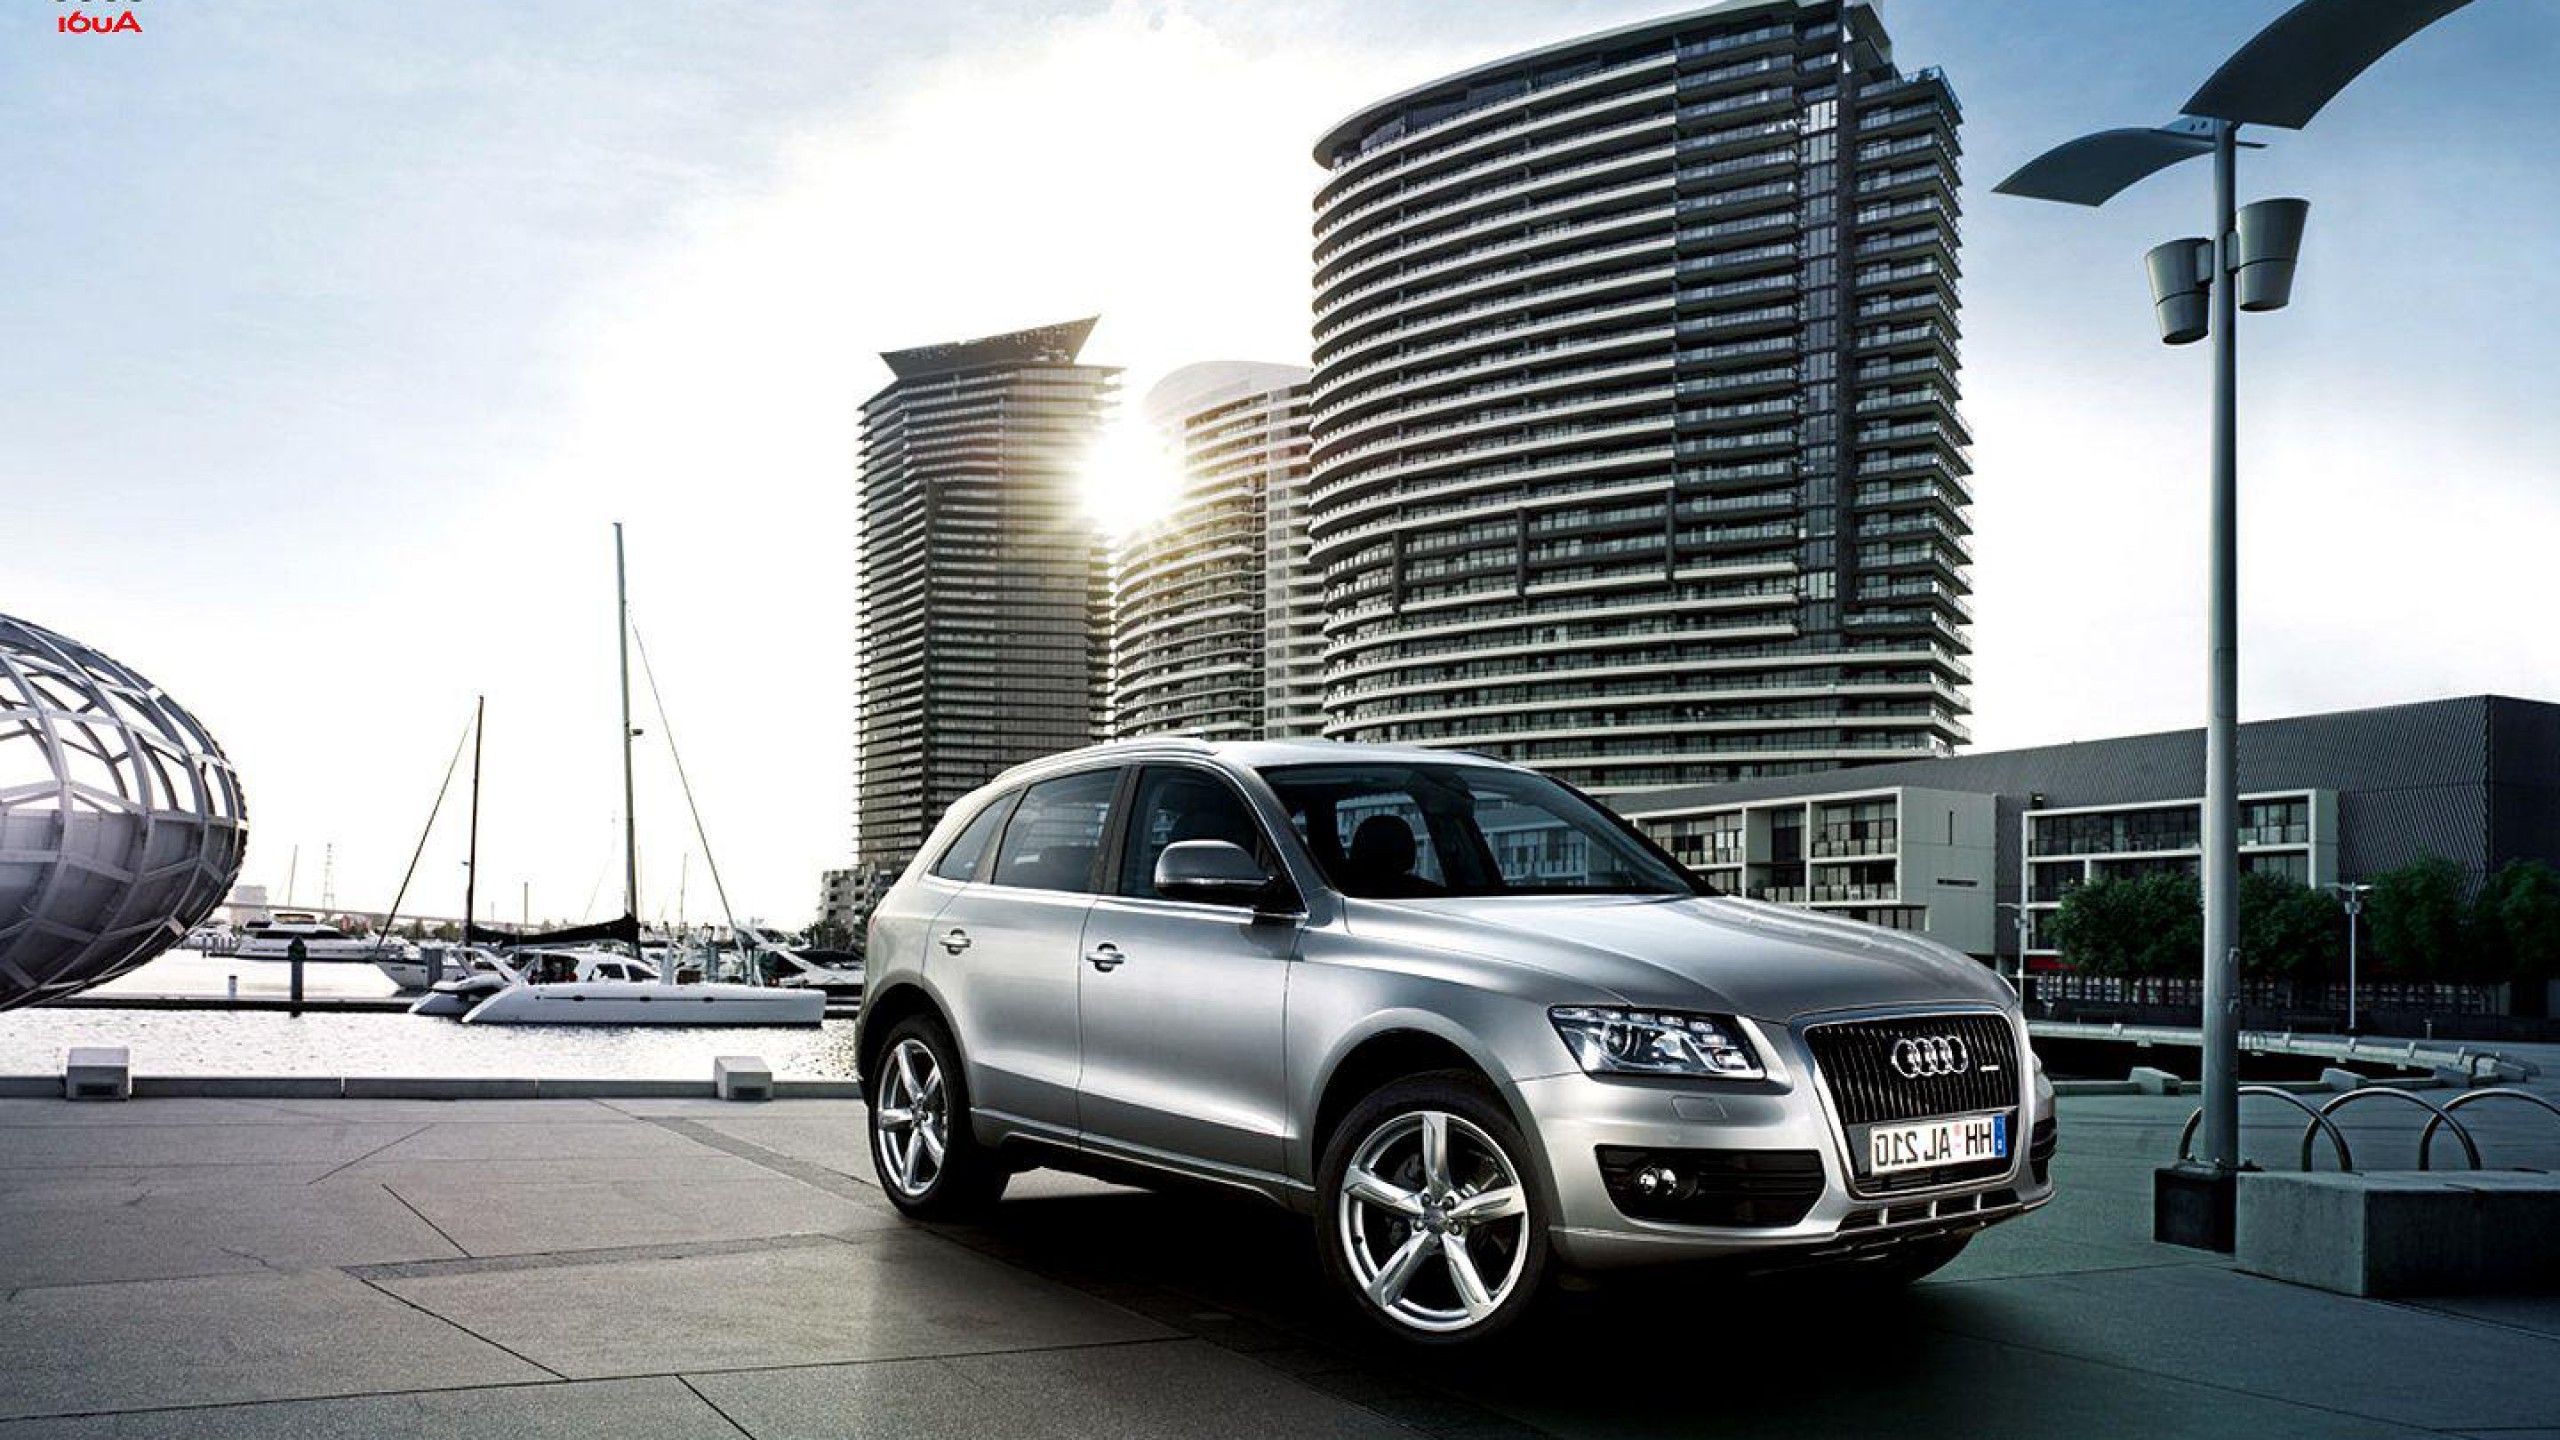 300 Best Audi Wallpapers Images On Pinterest - Audi Q5 Wallpapers Hd - HD Wallpaper 